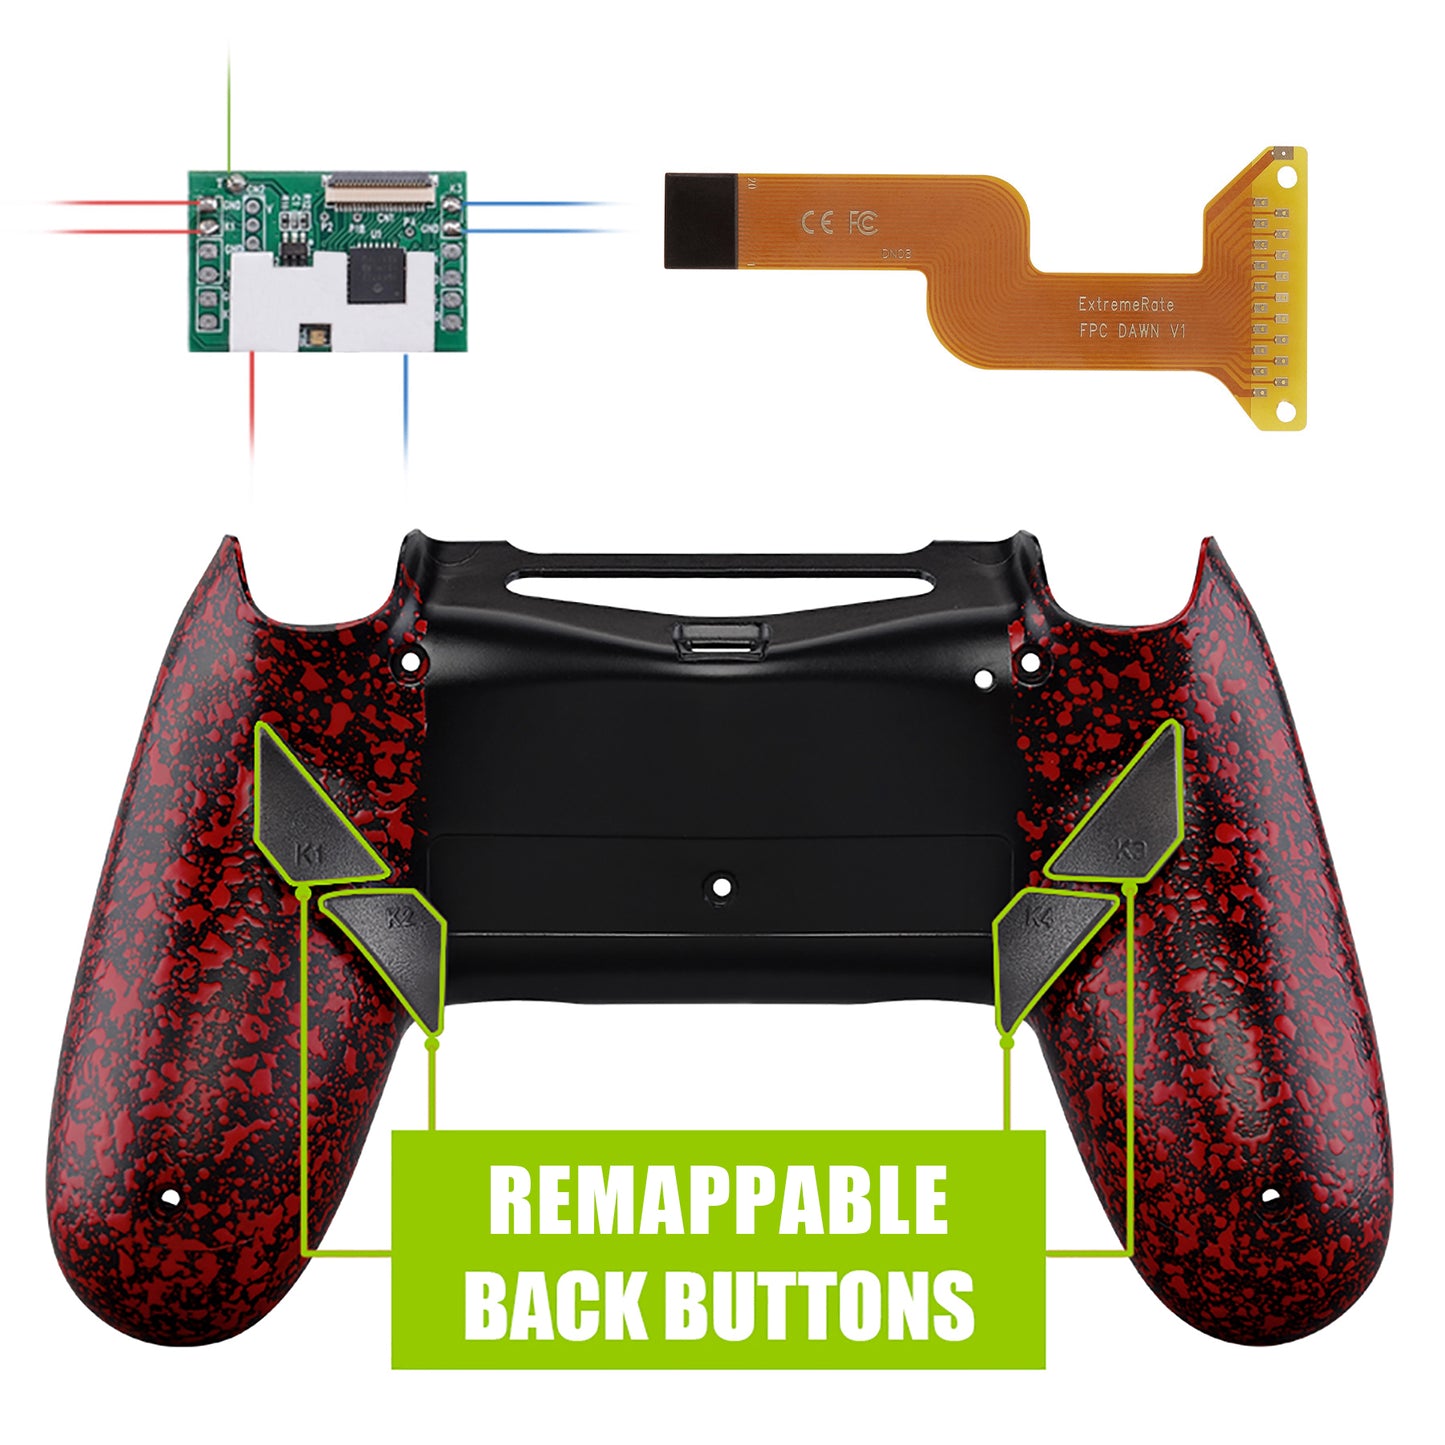 Textured Red Dawn Remappable Remap Kit with Redesigned Back Shell & 4 Back Buttons for ps4 Controller JDM 040/050/055 - P4RM009 eXtremeRate